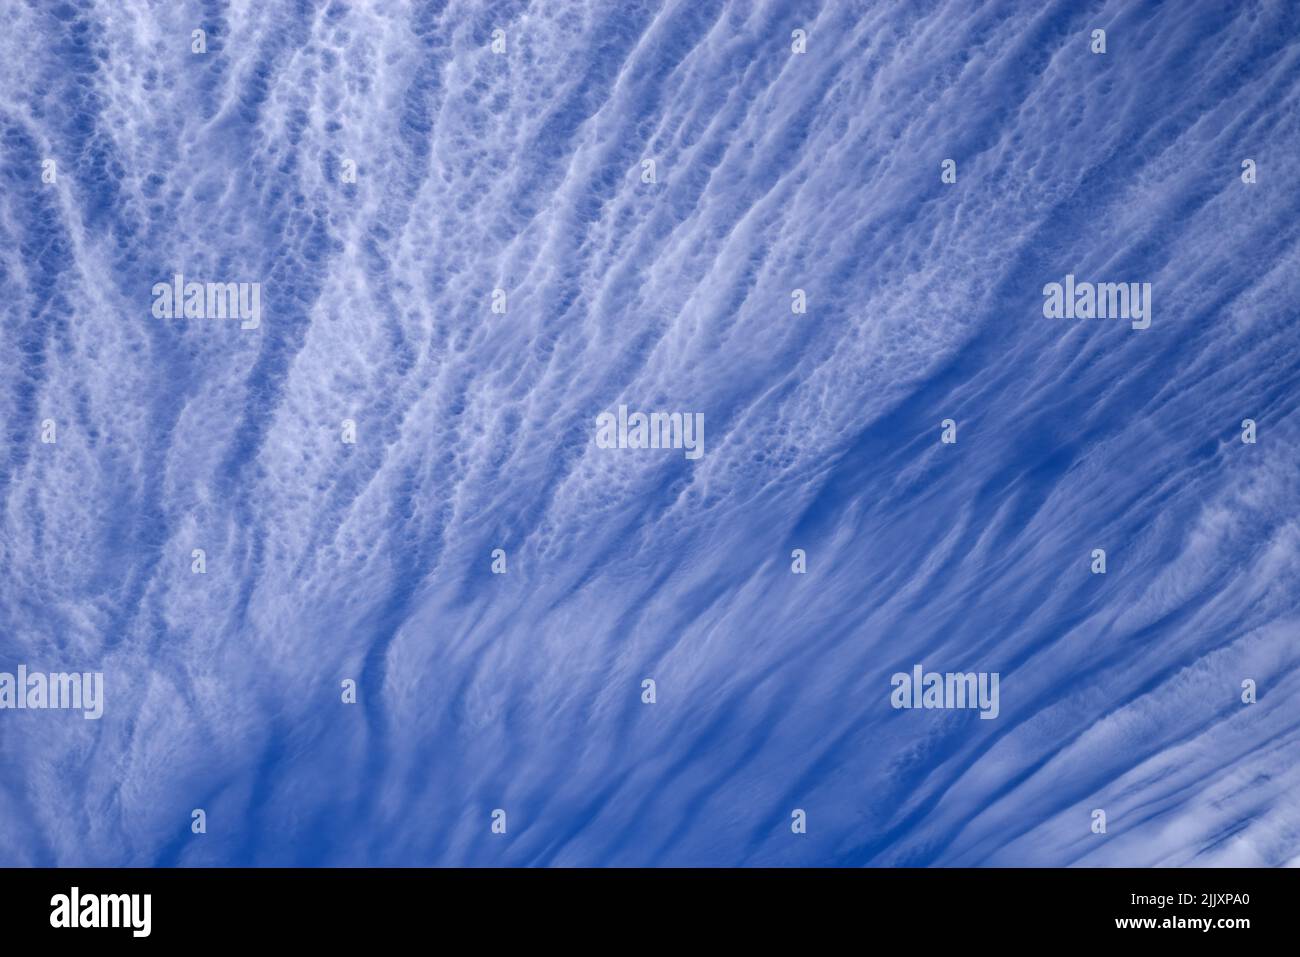 wispy white streaky cirrus clouds with a blue sky behind them Stock Photo